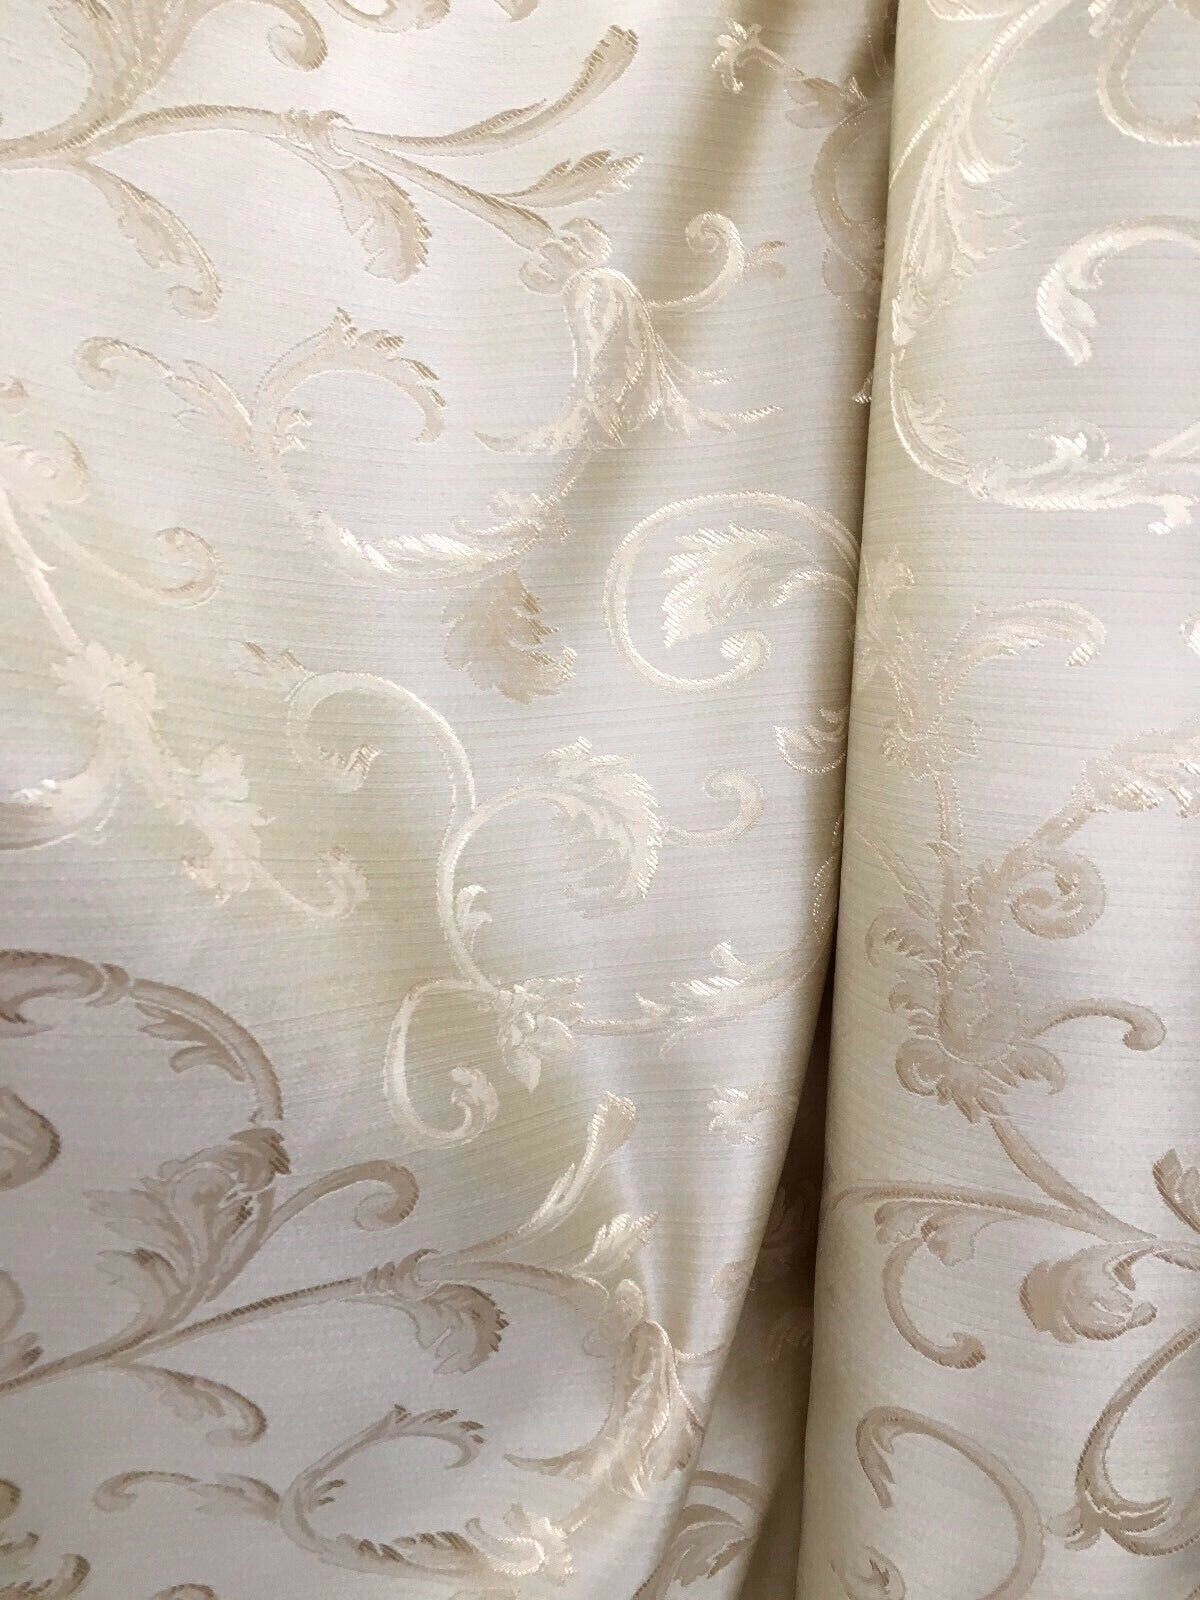 CHAMPAGNE Brocade Flower Floral Upholstery Drapery Fabric (110 in.) Sold By The Yard